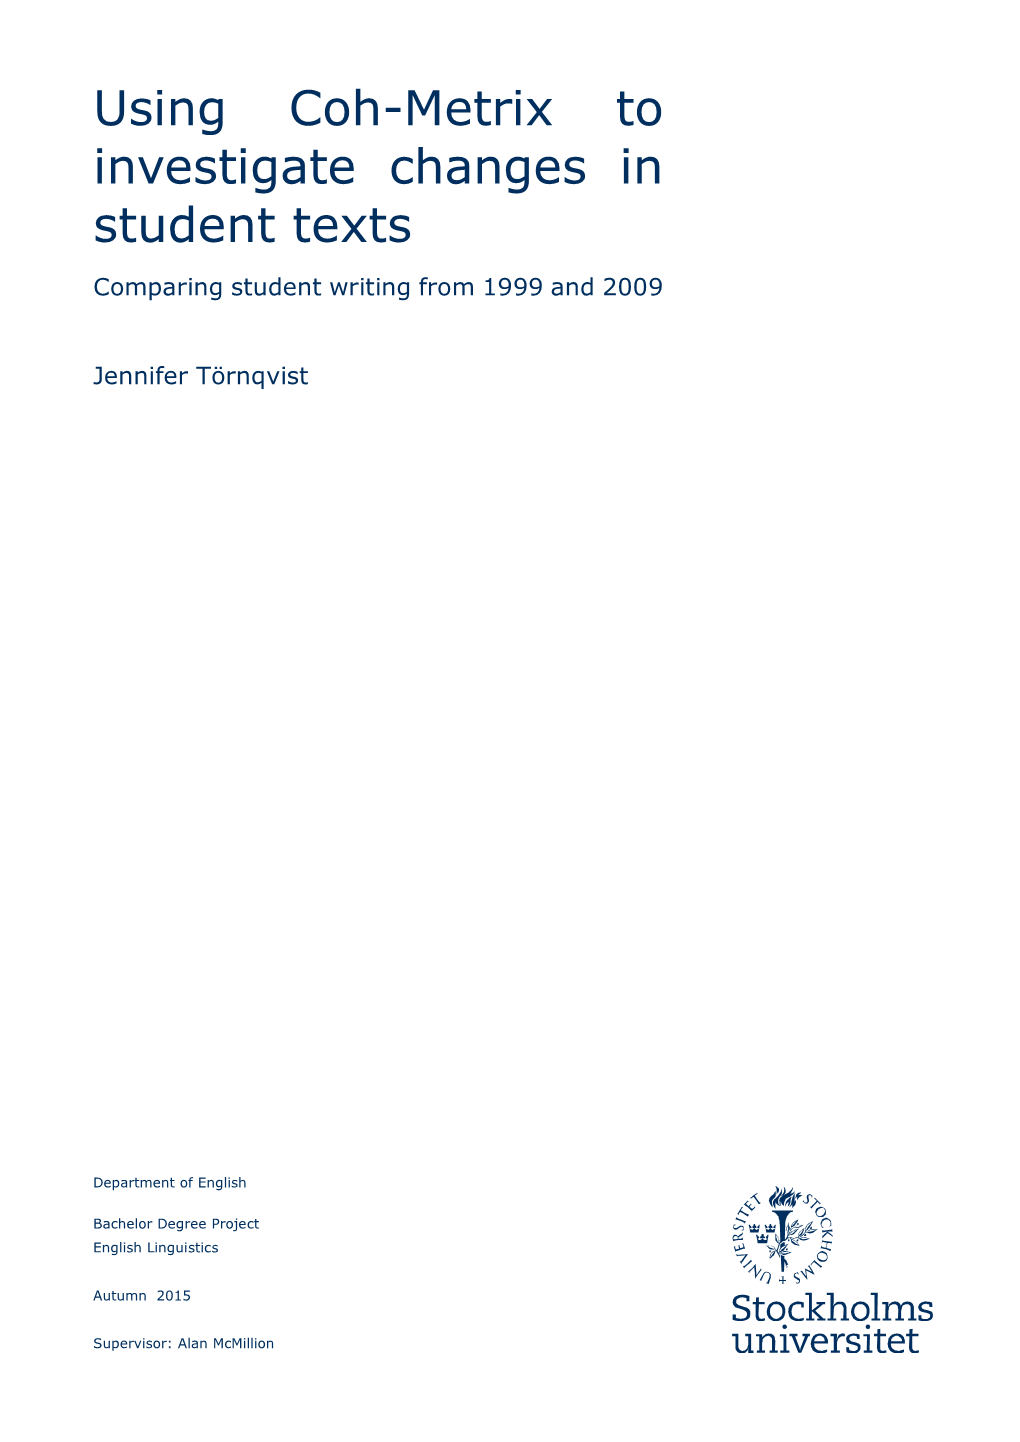 Using Coh-Metrix to Investigate Changes in Student Texts